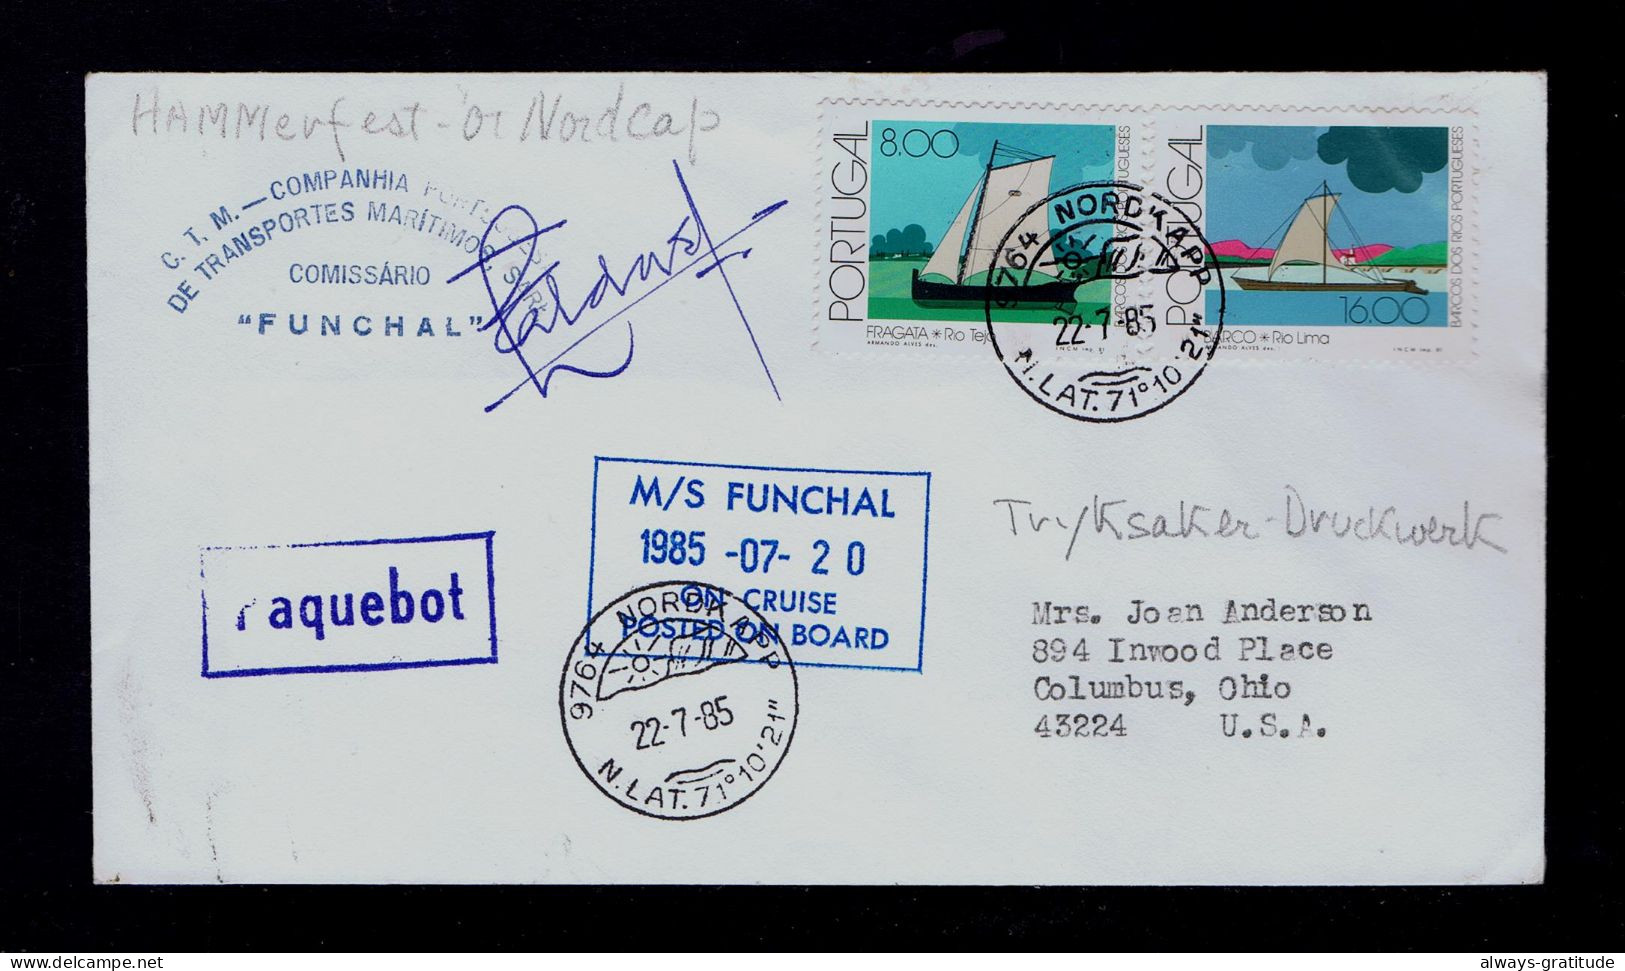 Sp10539 MADEIRA Island (FUNCHAL 1985 Posted On Board /cruise) Paquebot Portugal Mailed Ohio -US - Andere(Zee)